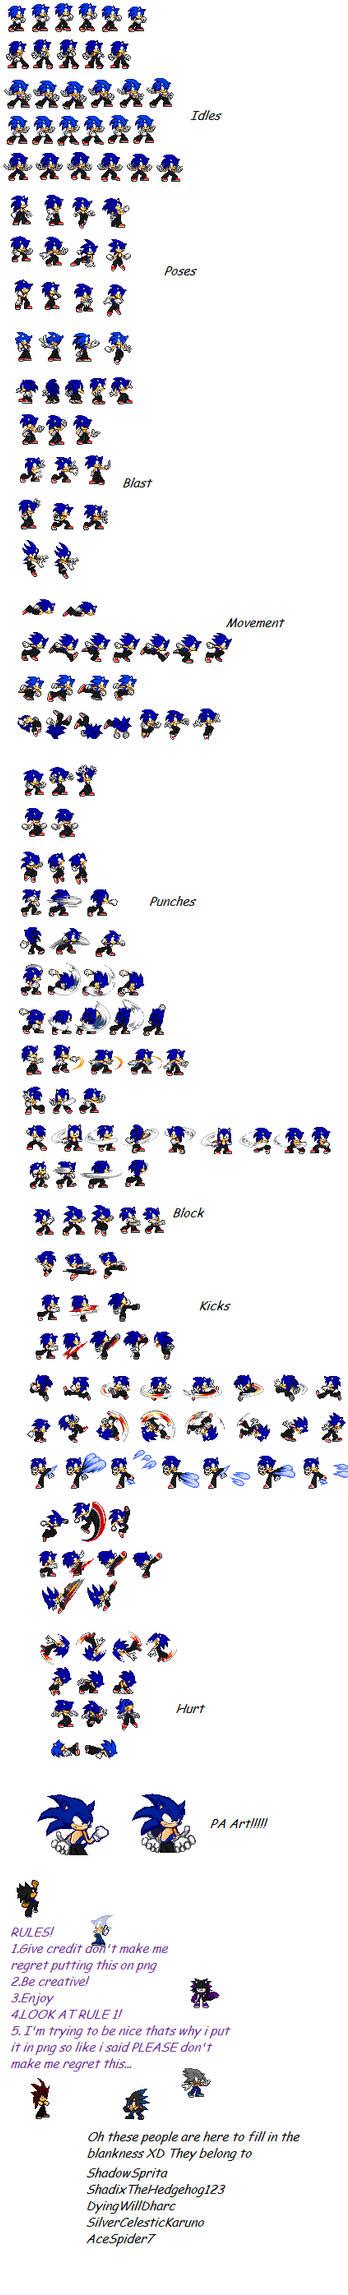 Sonic Ultimate Pants Sheet By Acespider7 On Deviantart